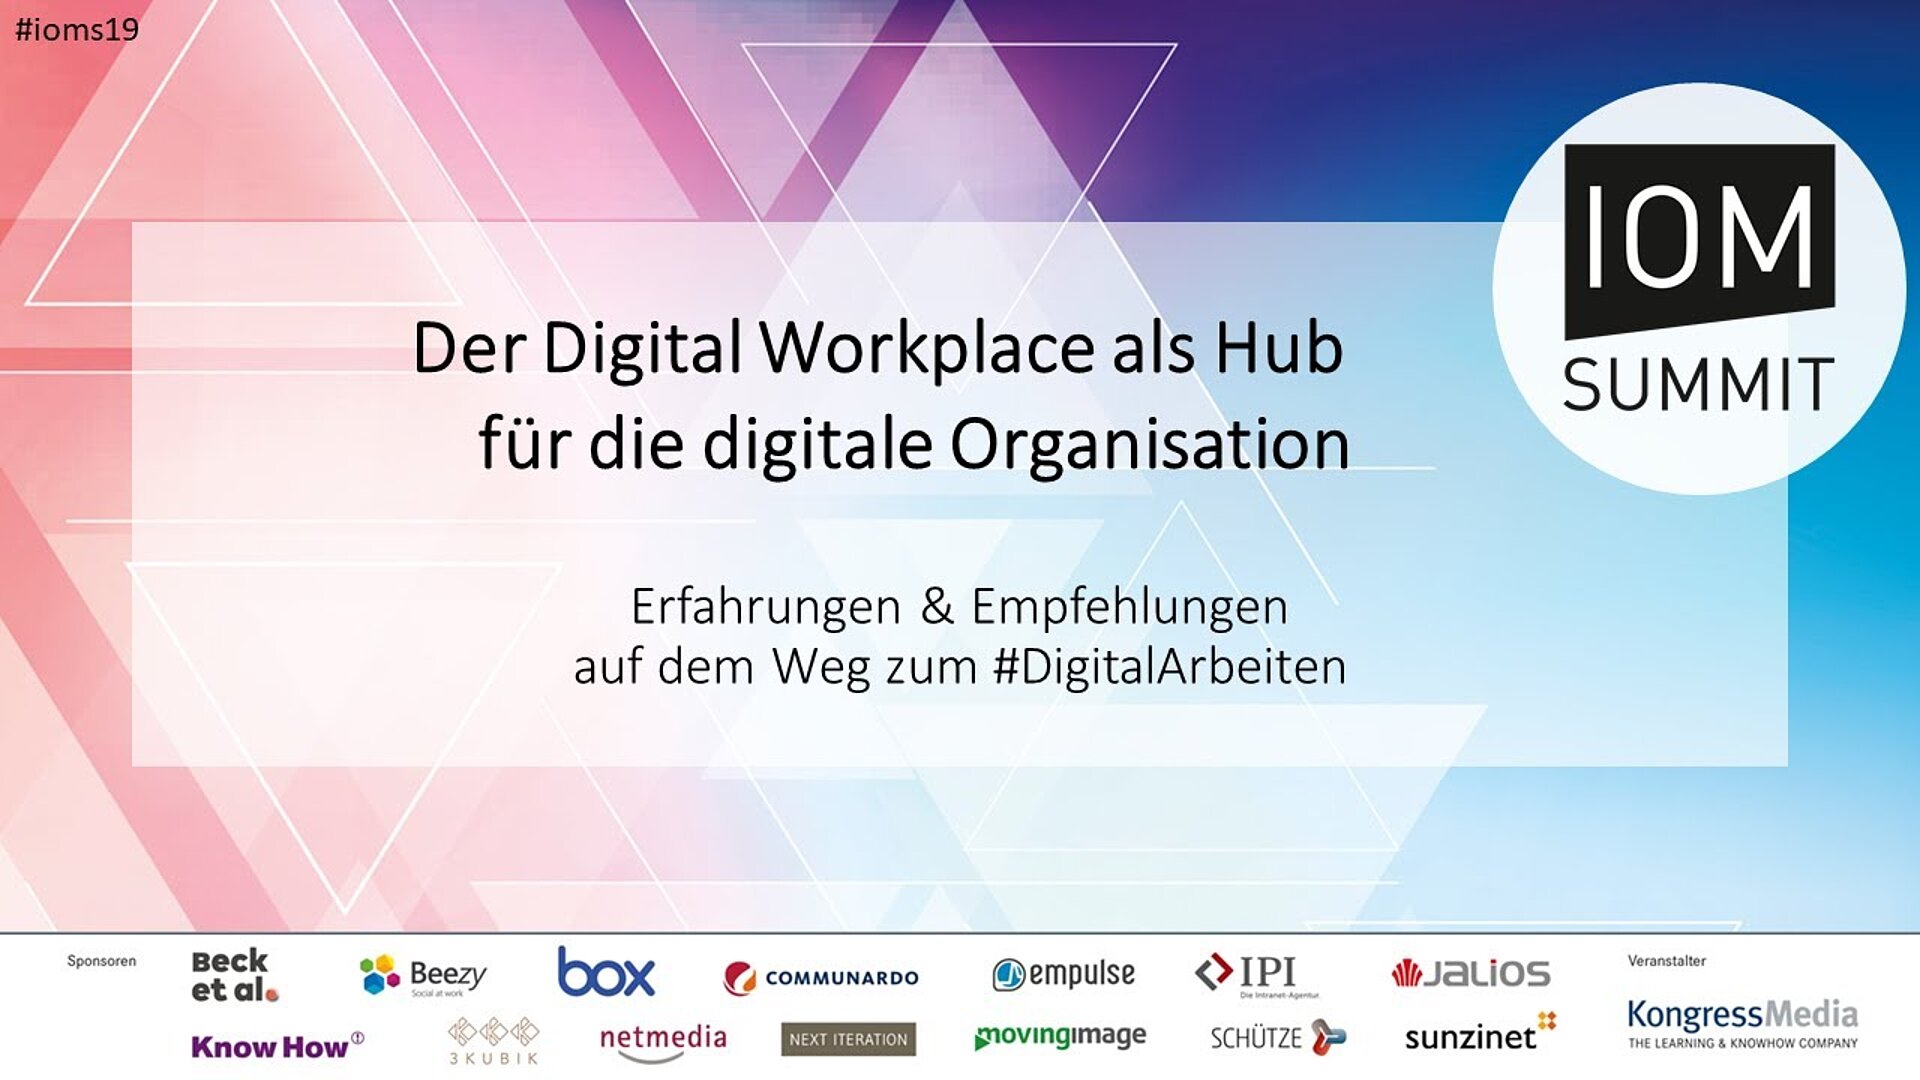 Keynote: Digital Workplace, Employee Experience & The Enablement Of The Digital Organisation